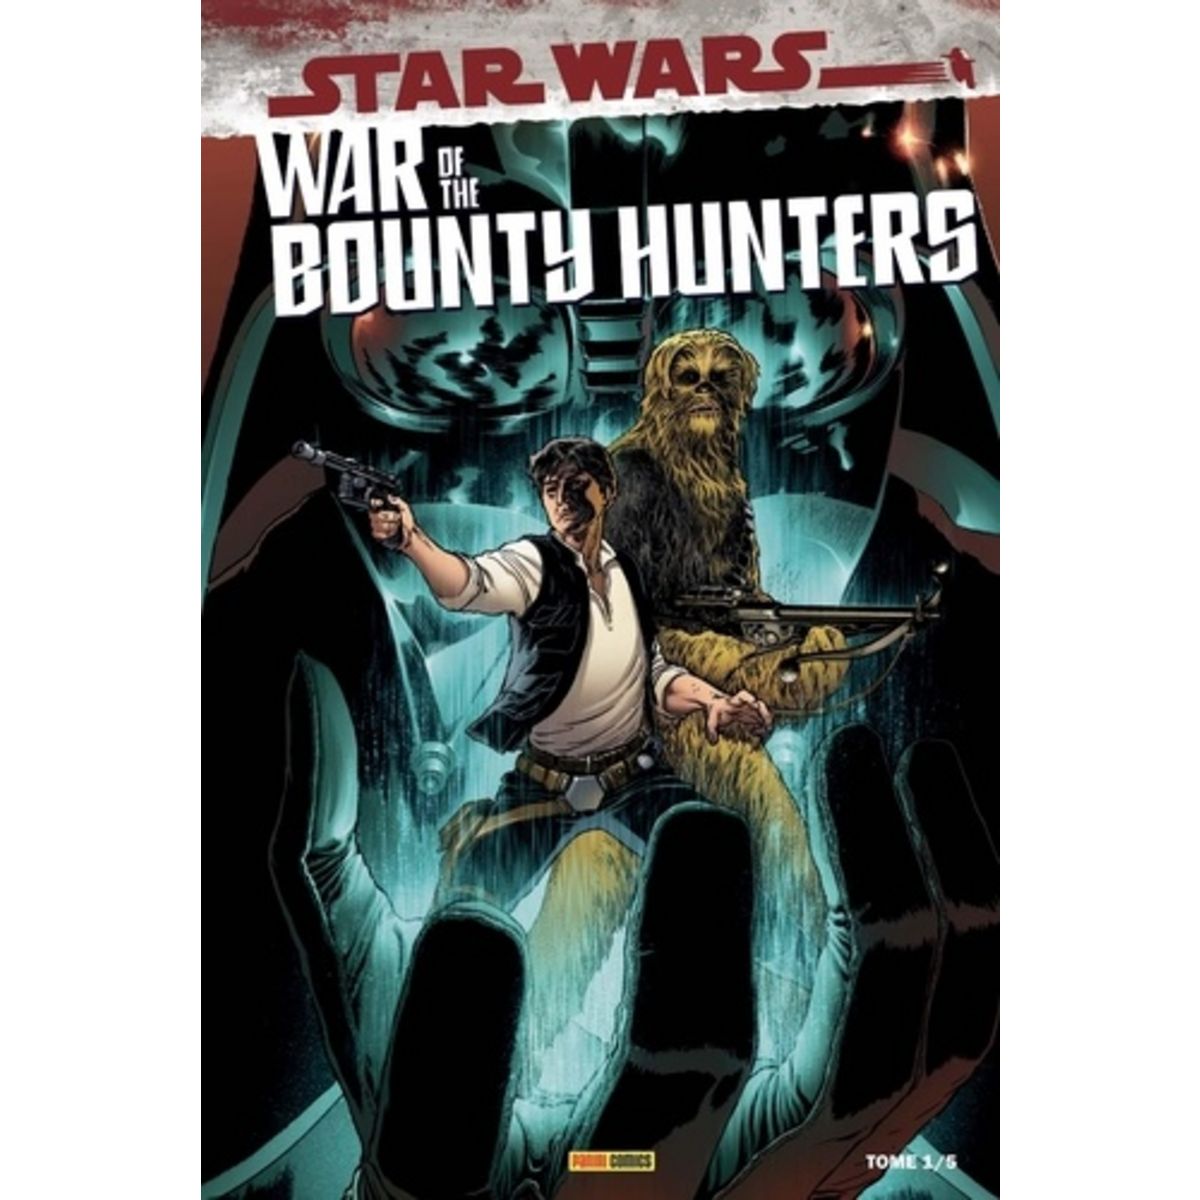  STAR WARS - WAR OF THE BOUNTY HUNTERS TOME 1 . EDITION COLLECTOR, Soule Charles